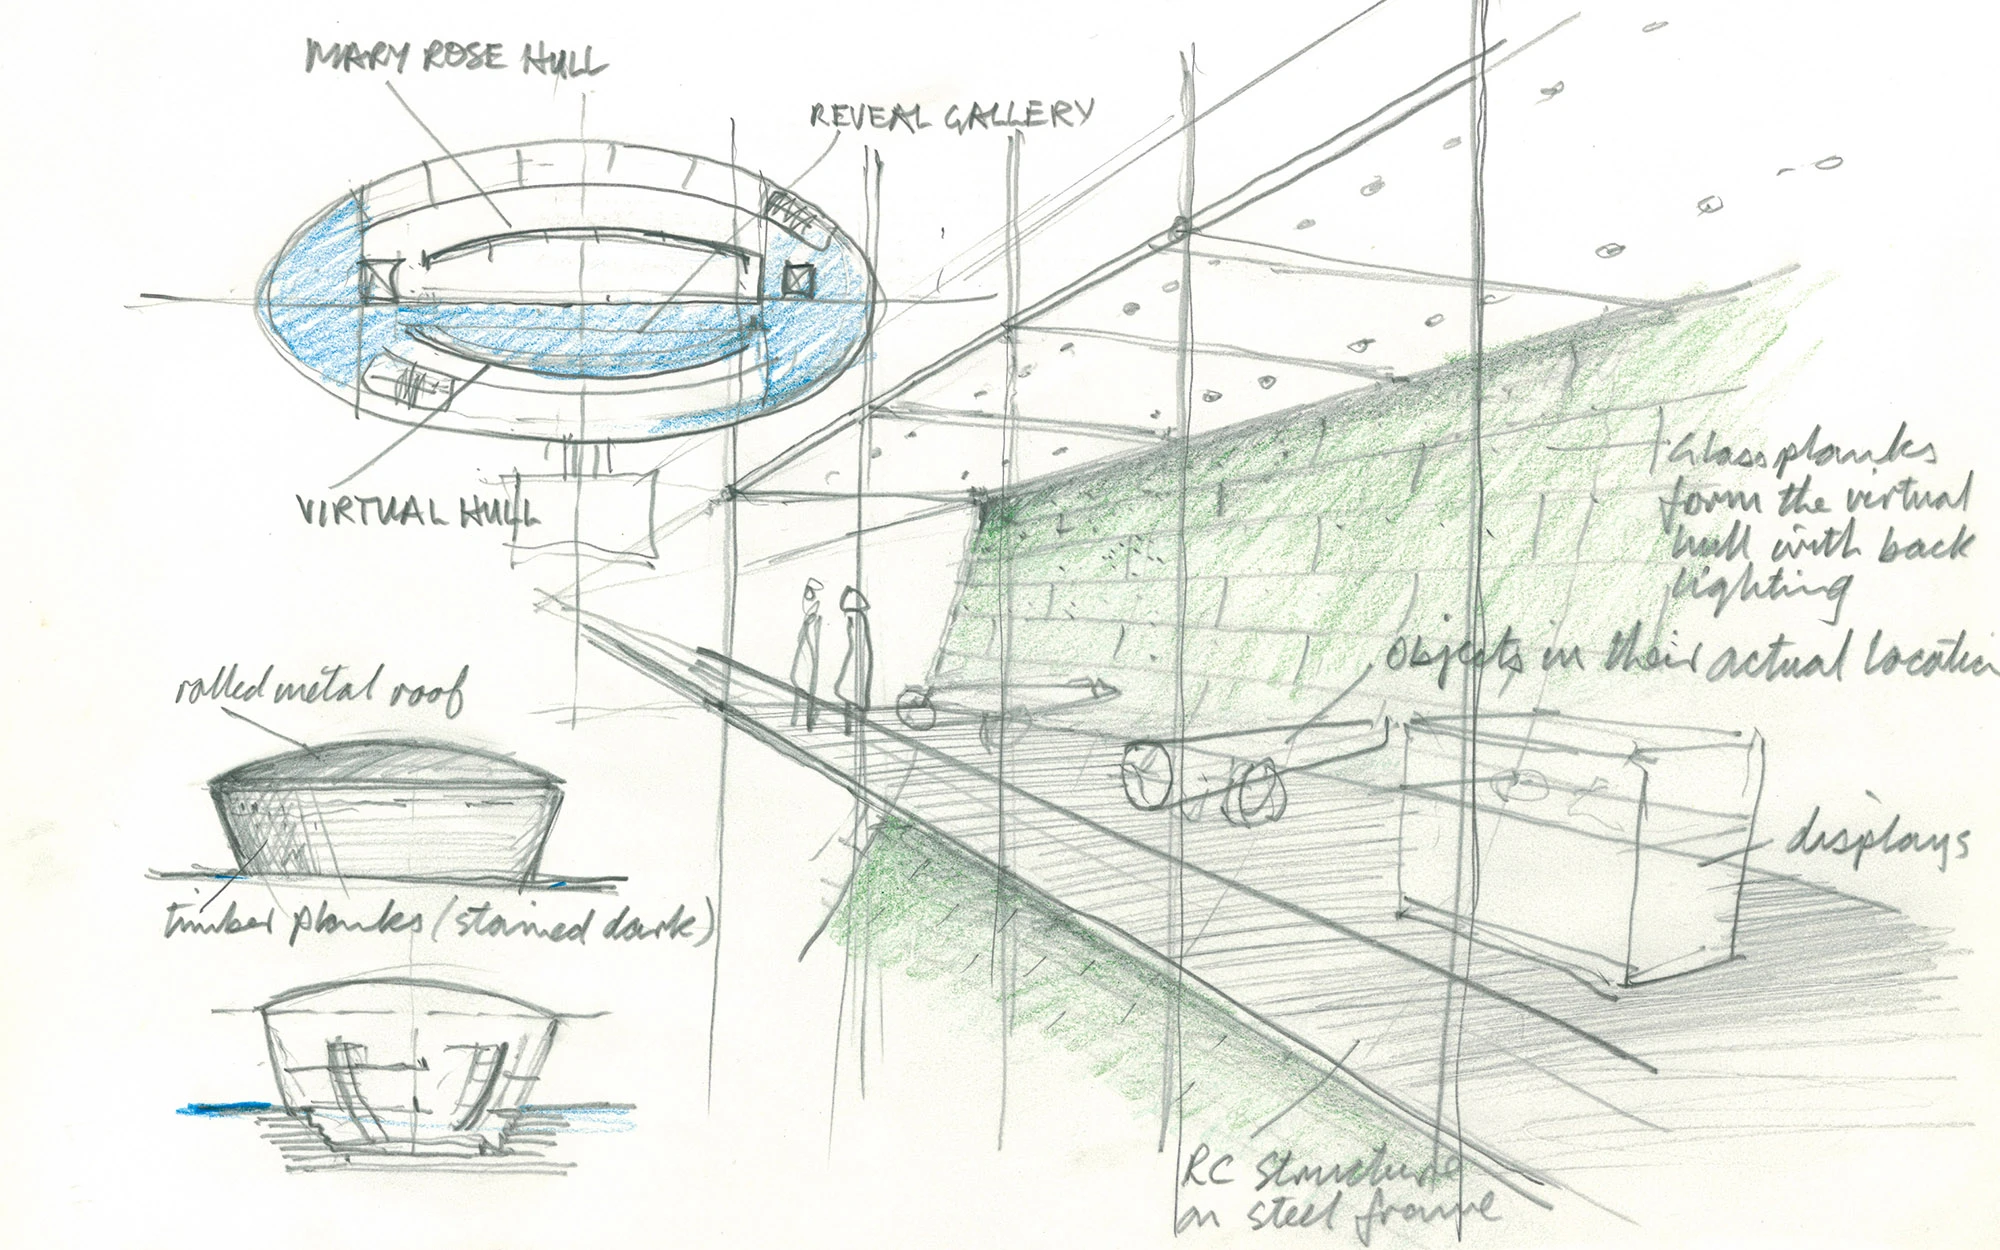 Concept sketch of Mary Rose Museum